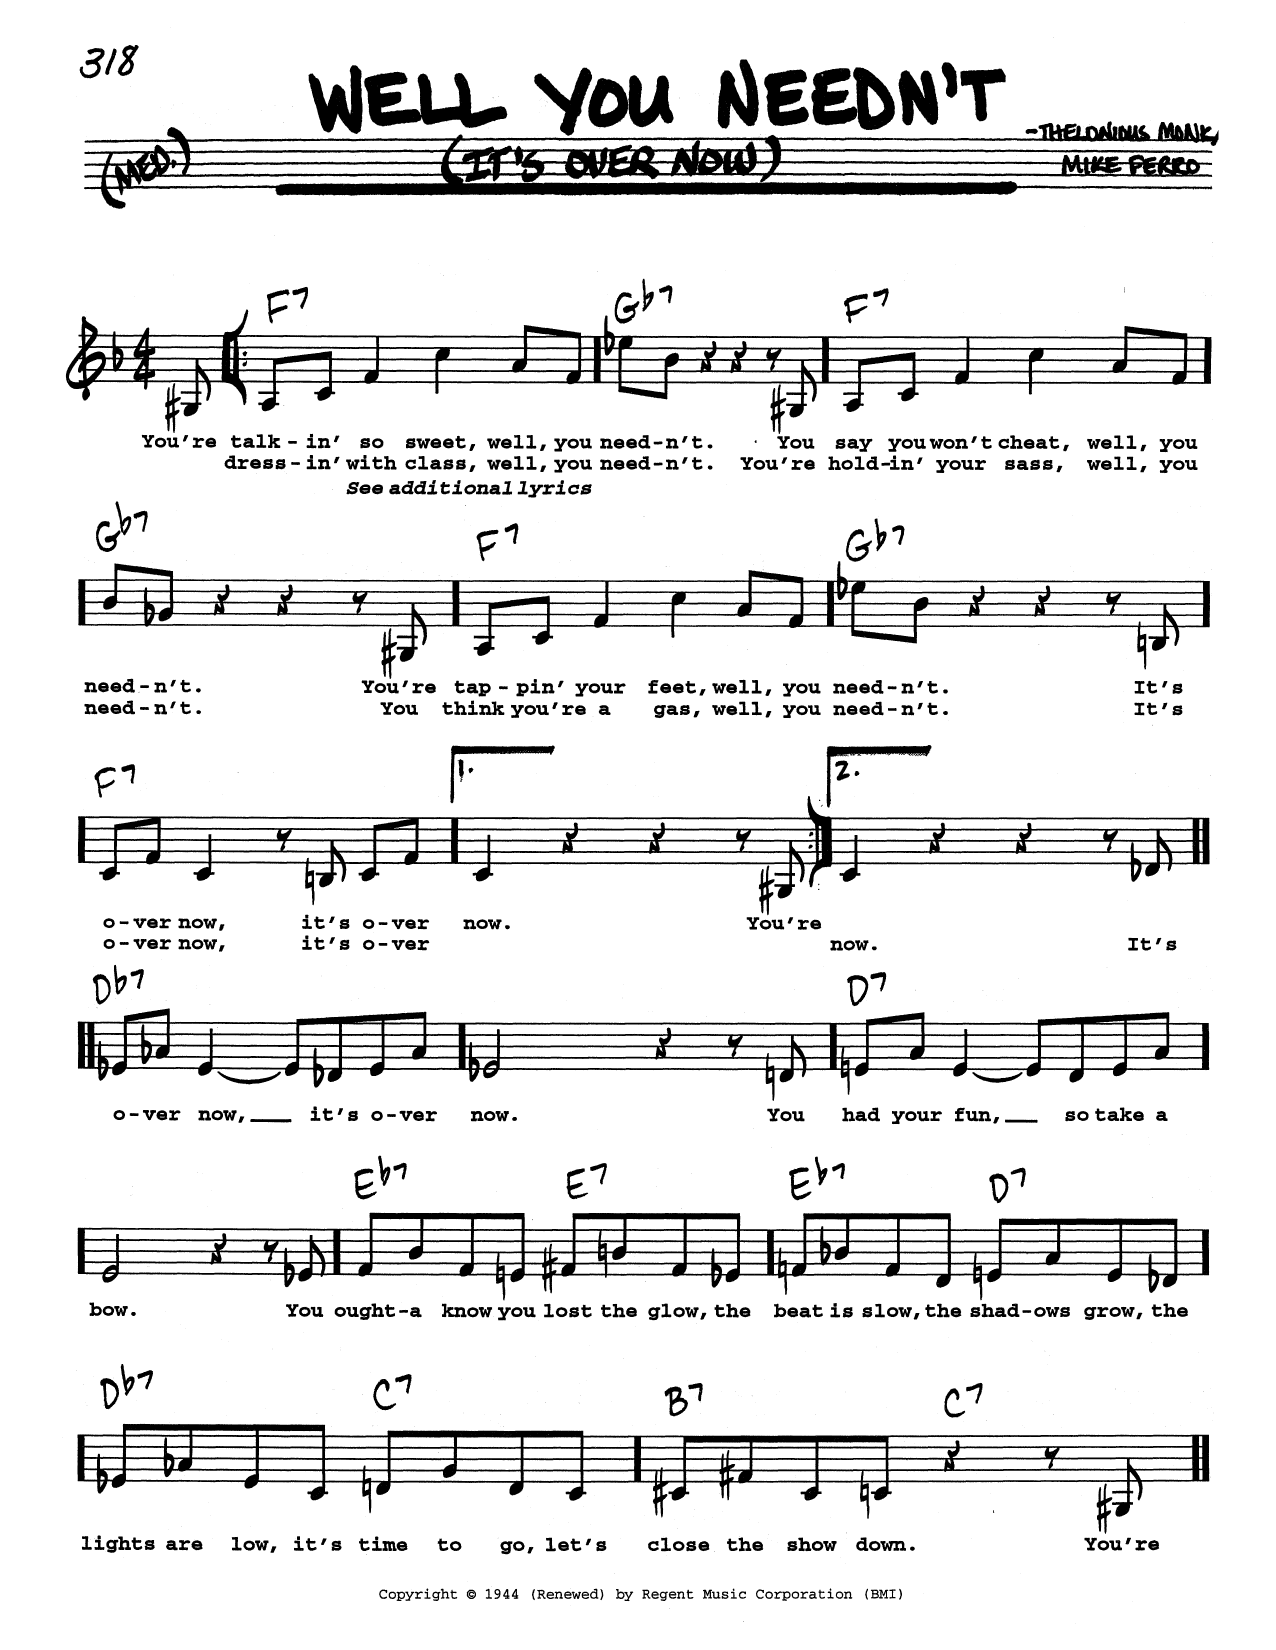 Thelonious Monk Well You Needn't (It's Over Now) (Low Voice) sheet music notes printable PDF score